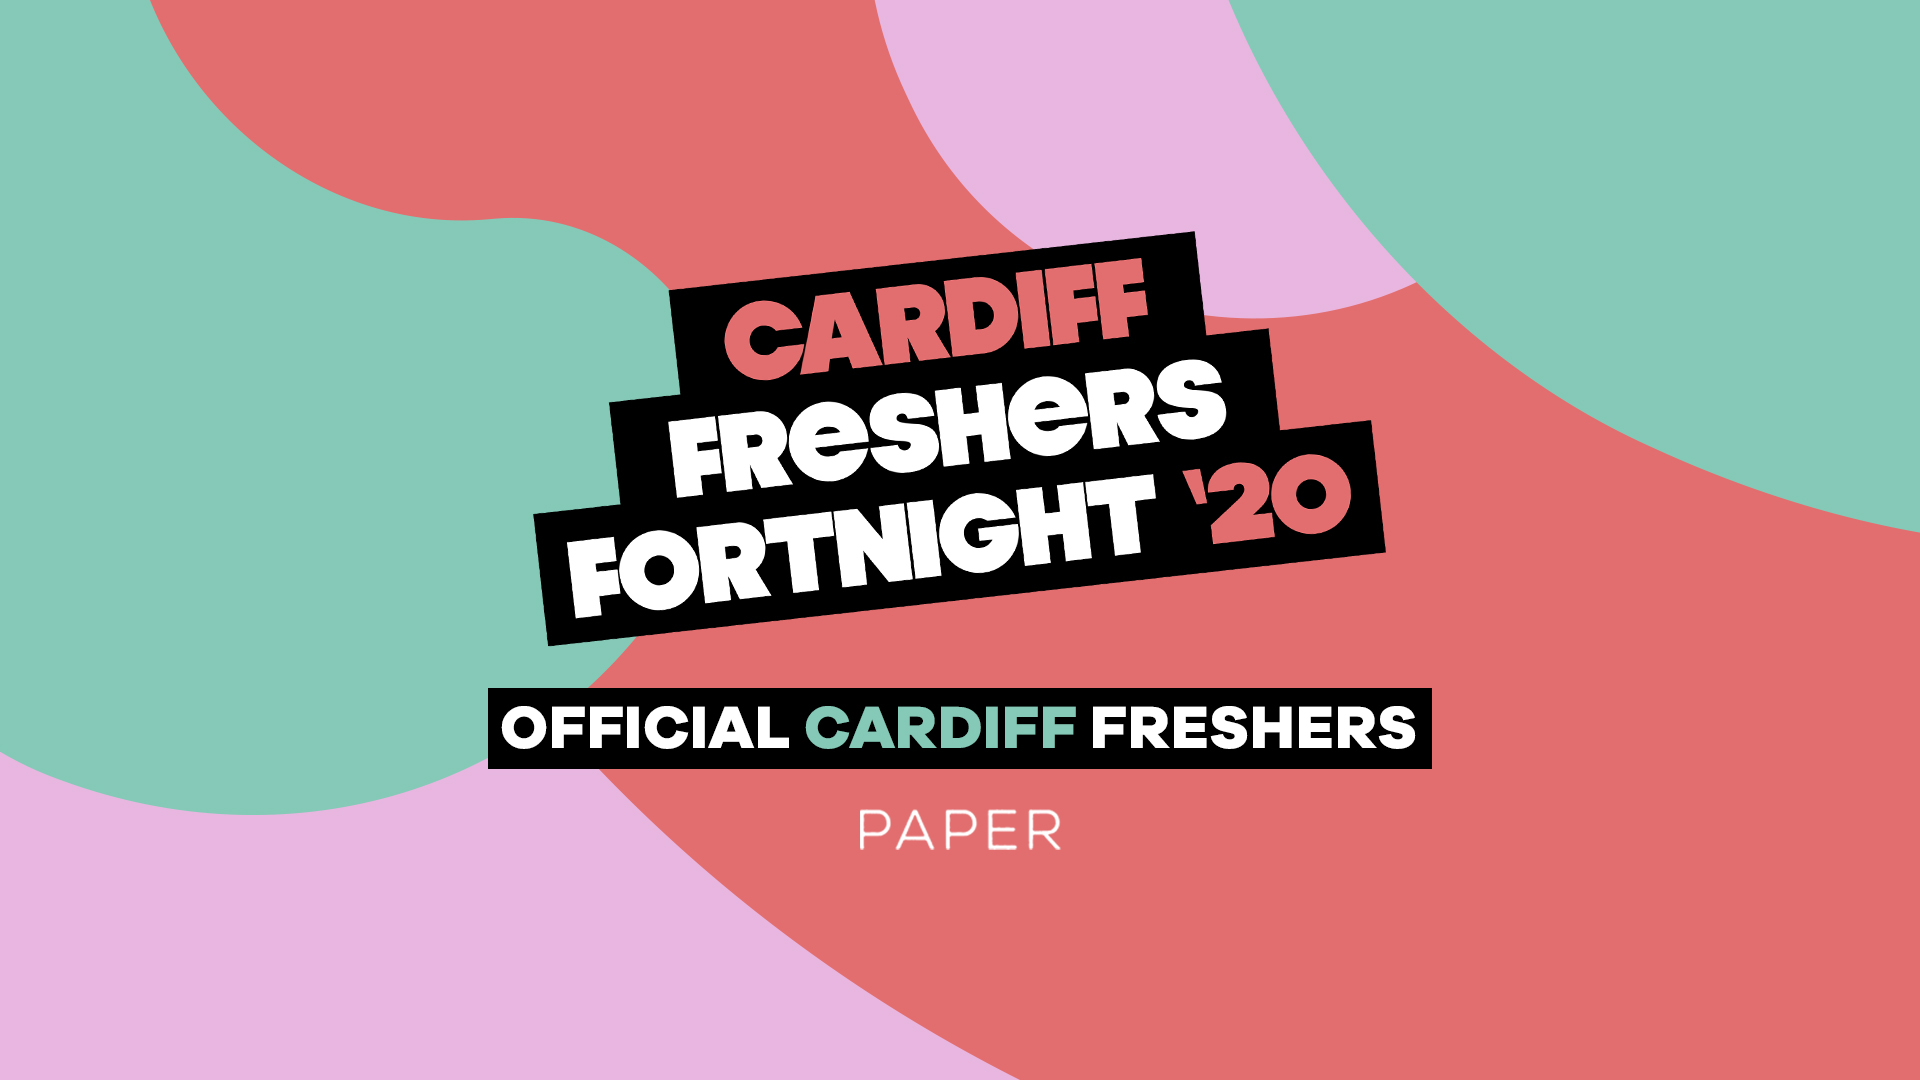 official cardiff freshers fortnight 2020 (wristbands)